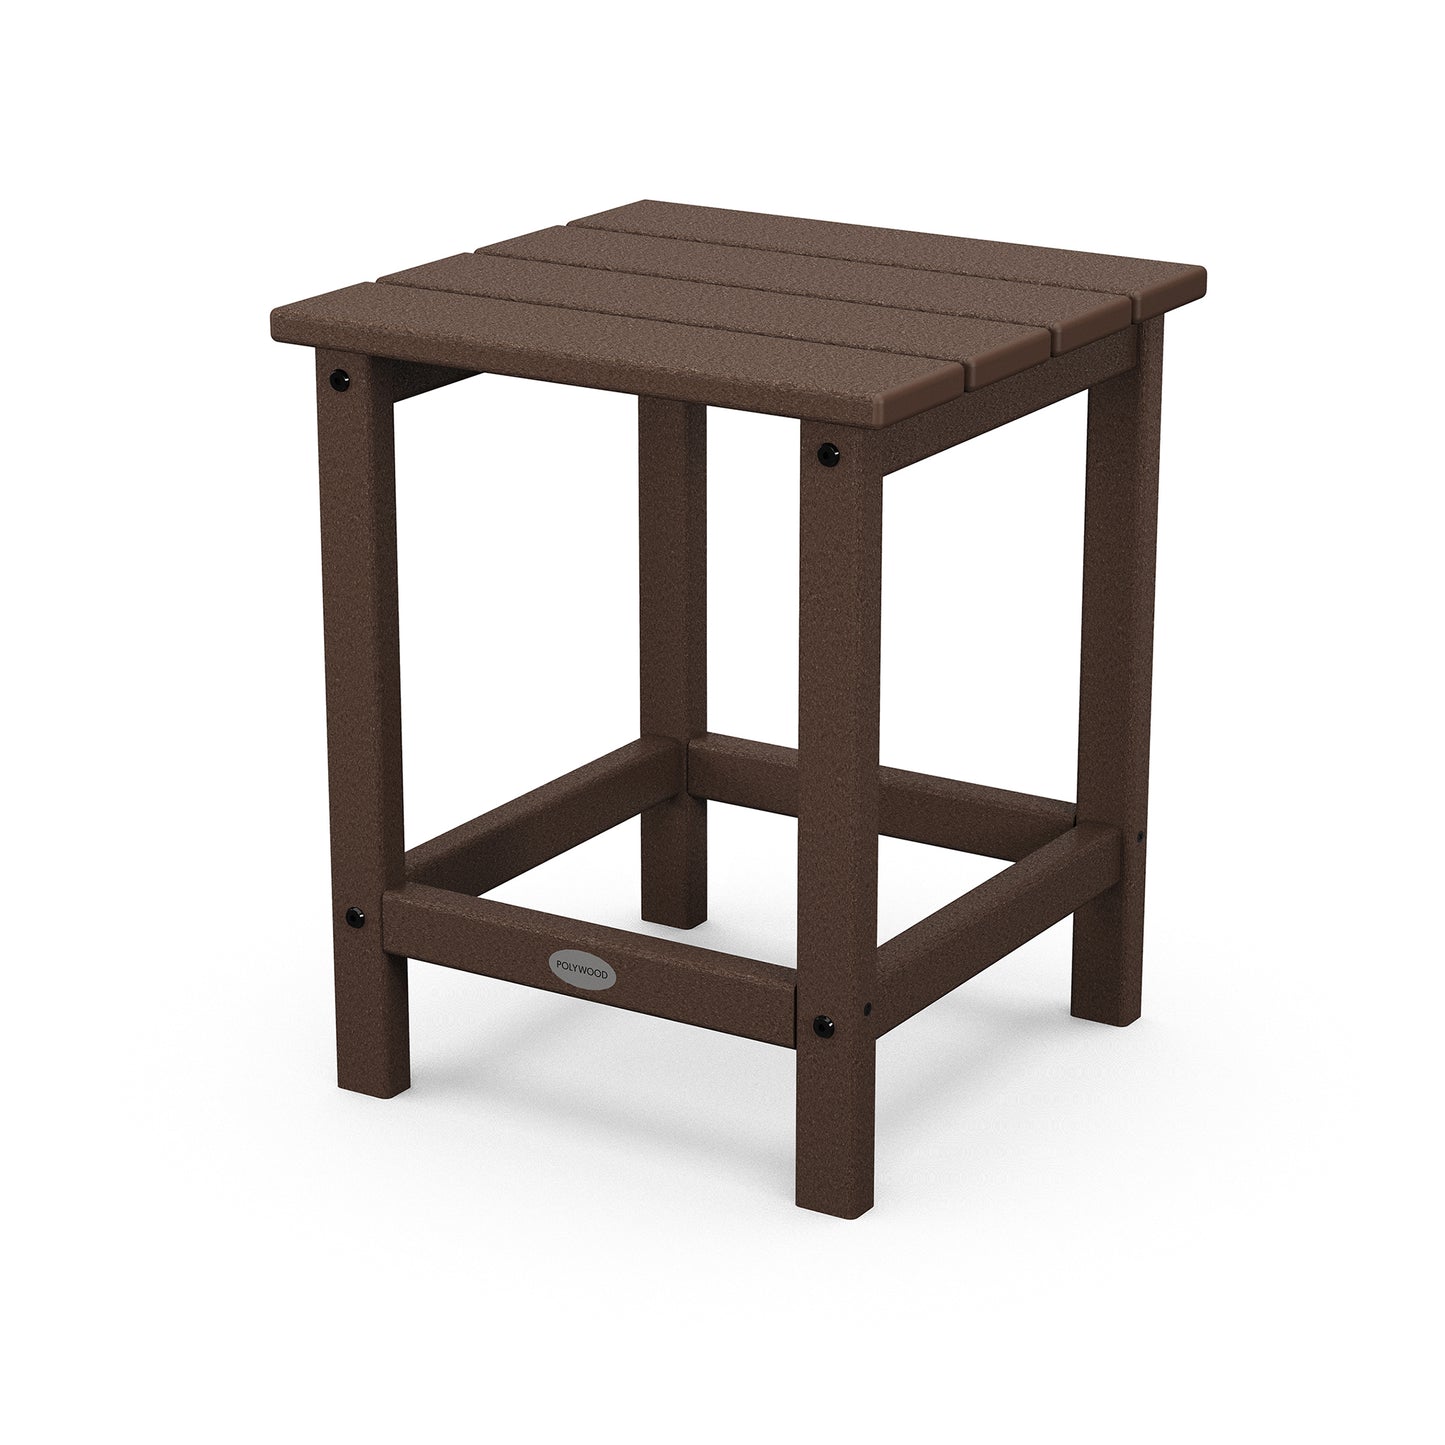 A small, dark brown POLYWOOD® Long Island 18" side table made of plastic with a square top and four legs, featuring a lower support shelf, against a plain white background.